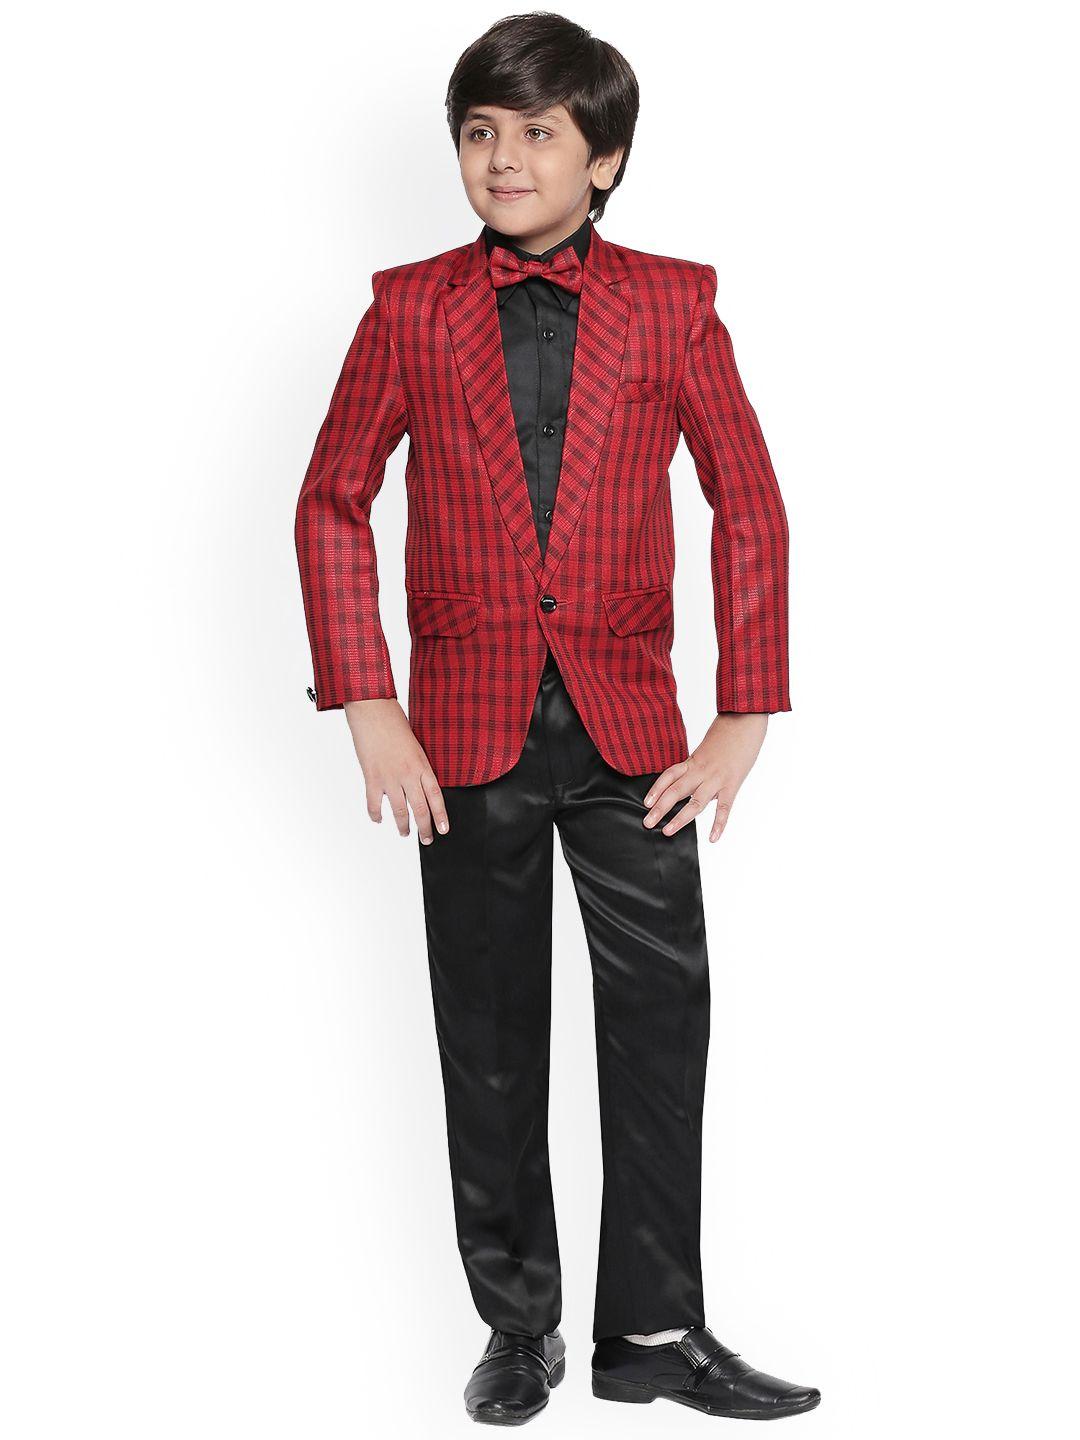 jeetethnics boys red & black checked party suit